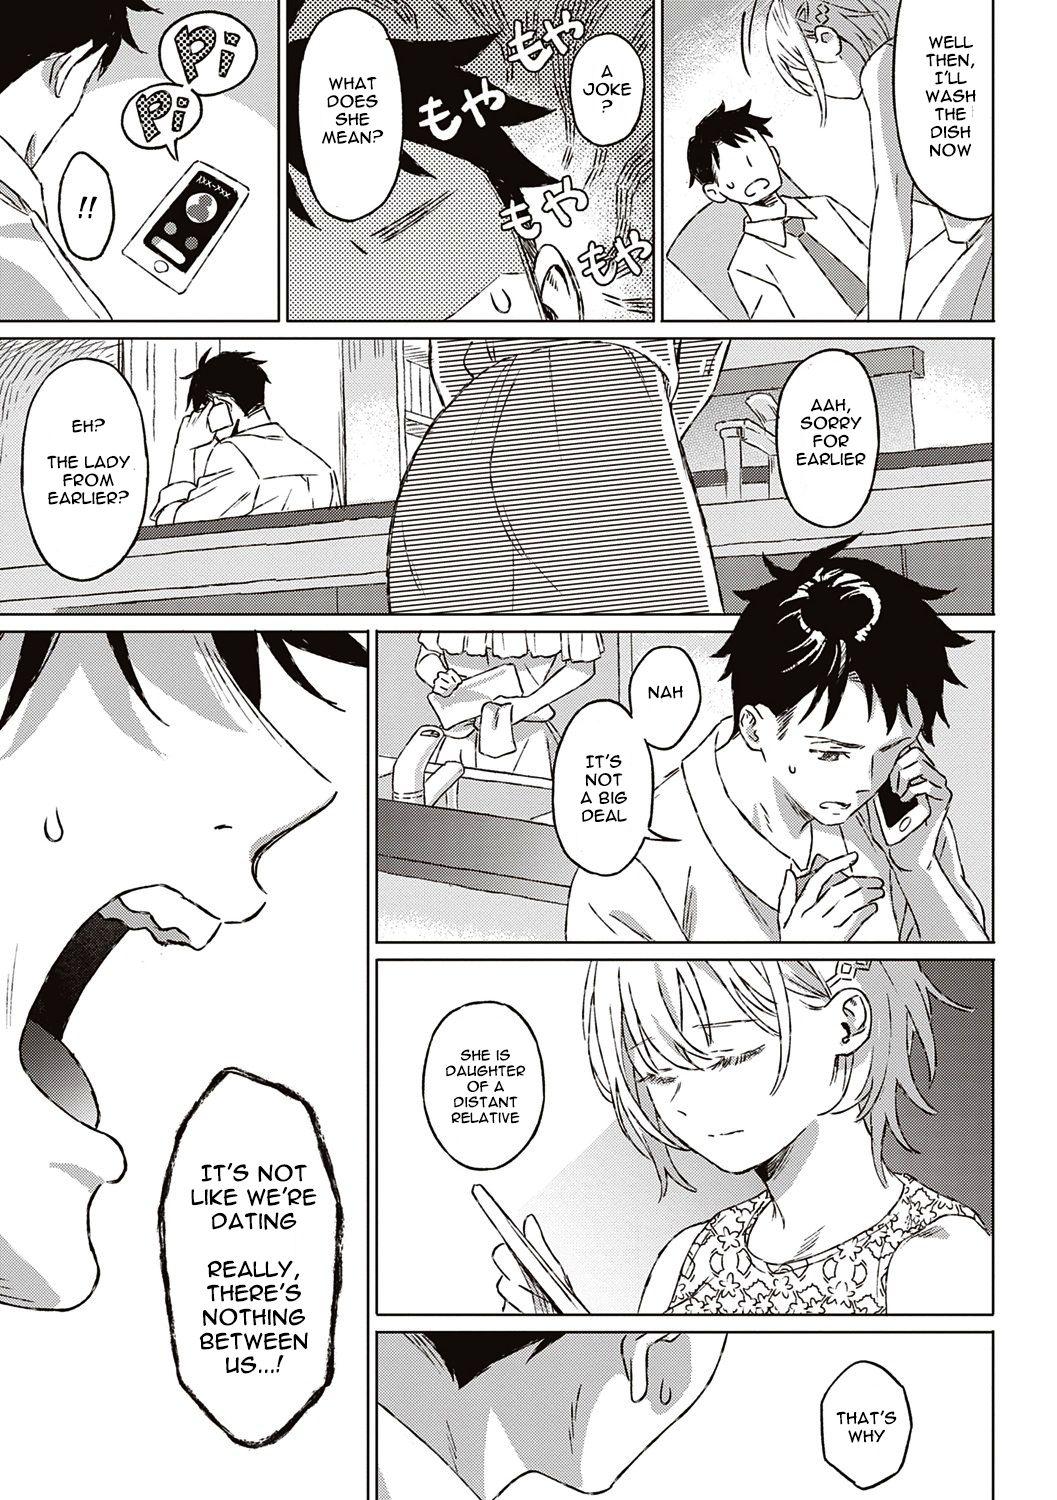 European Shinsou no Hanayome + After Story | Closeted Bride + After Story Oldvsyoung - Page 7